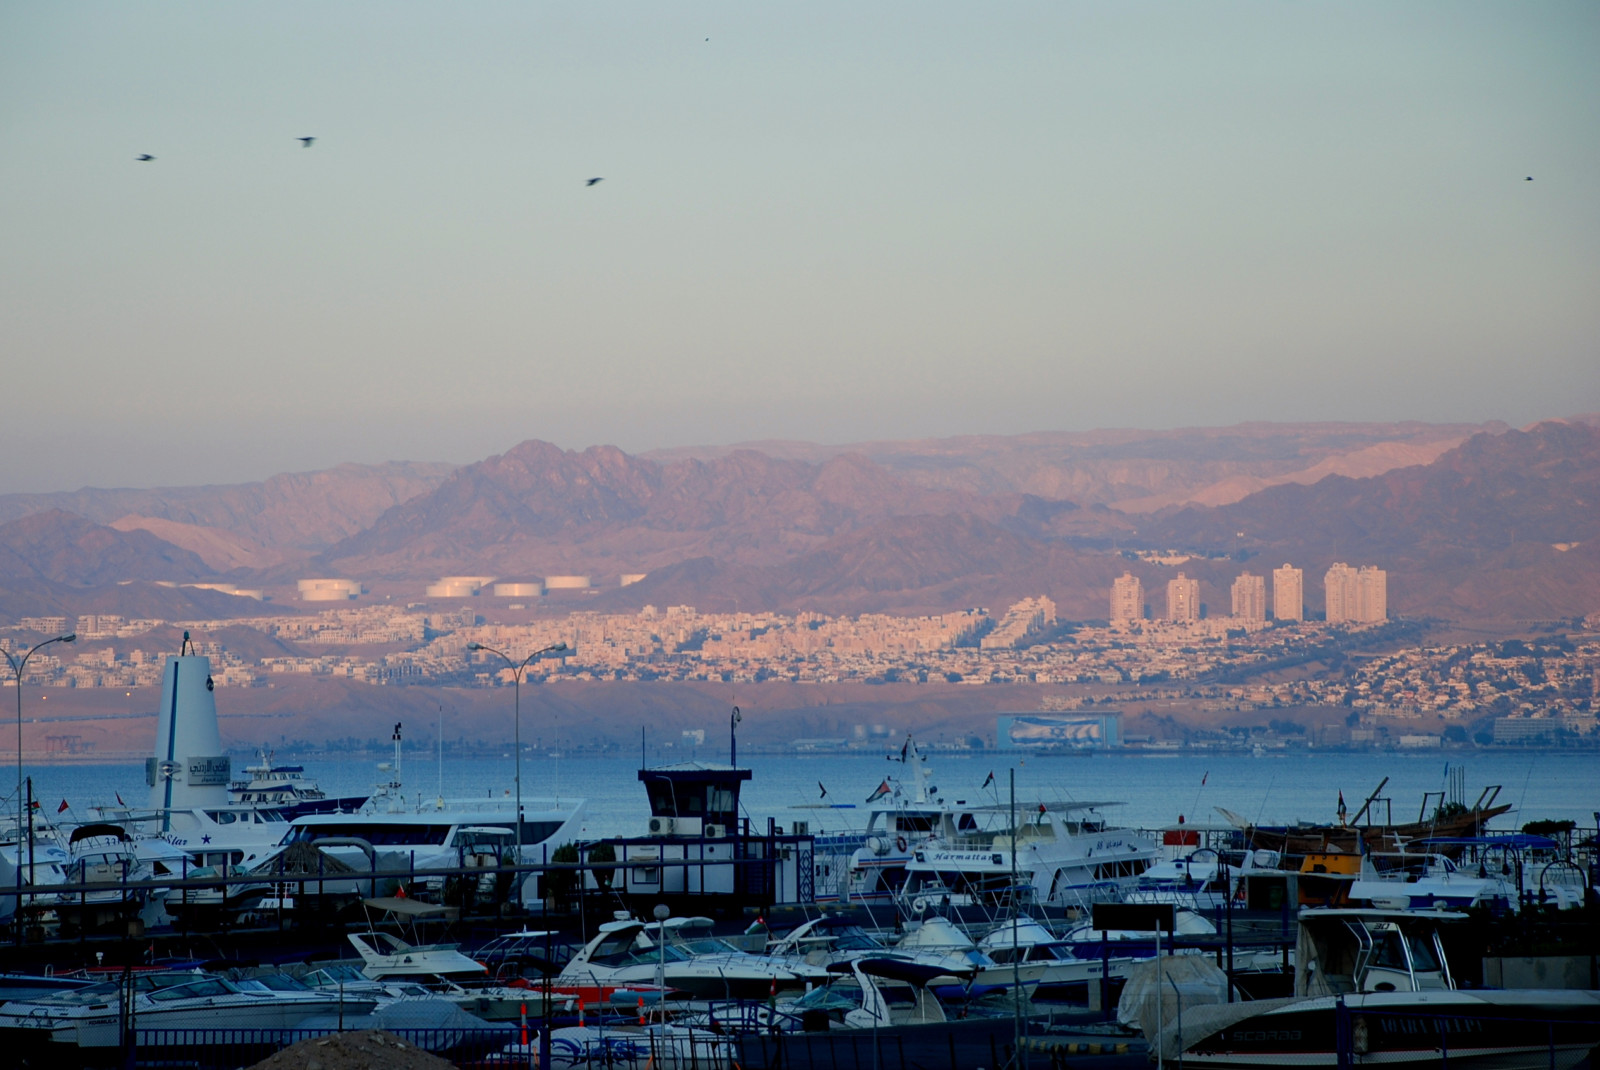 Boats parked along the water in Aqaba, Jordan with red hills and buildings in the background